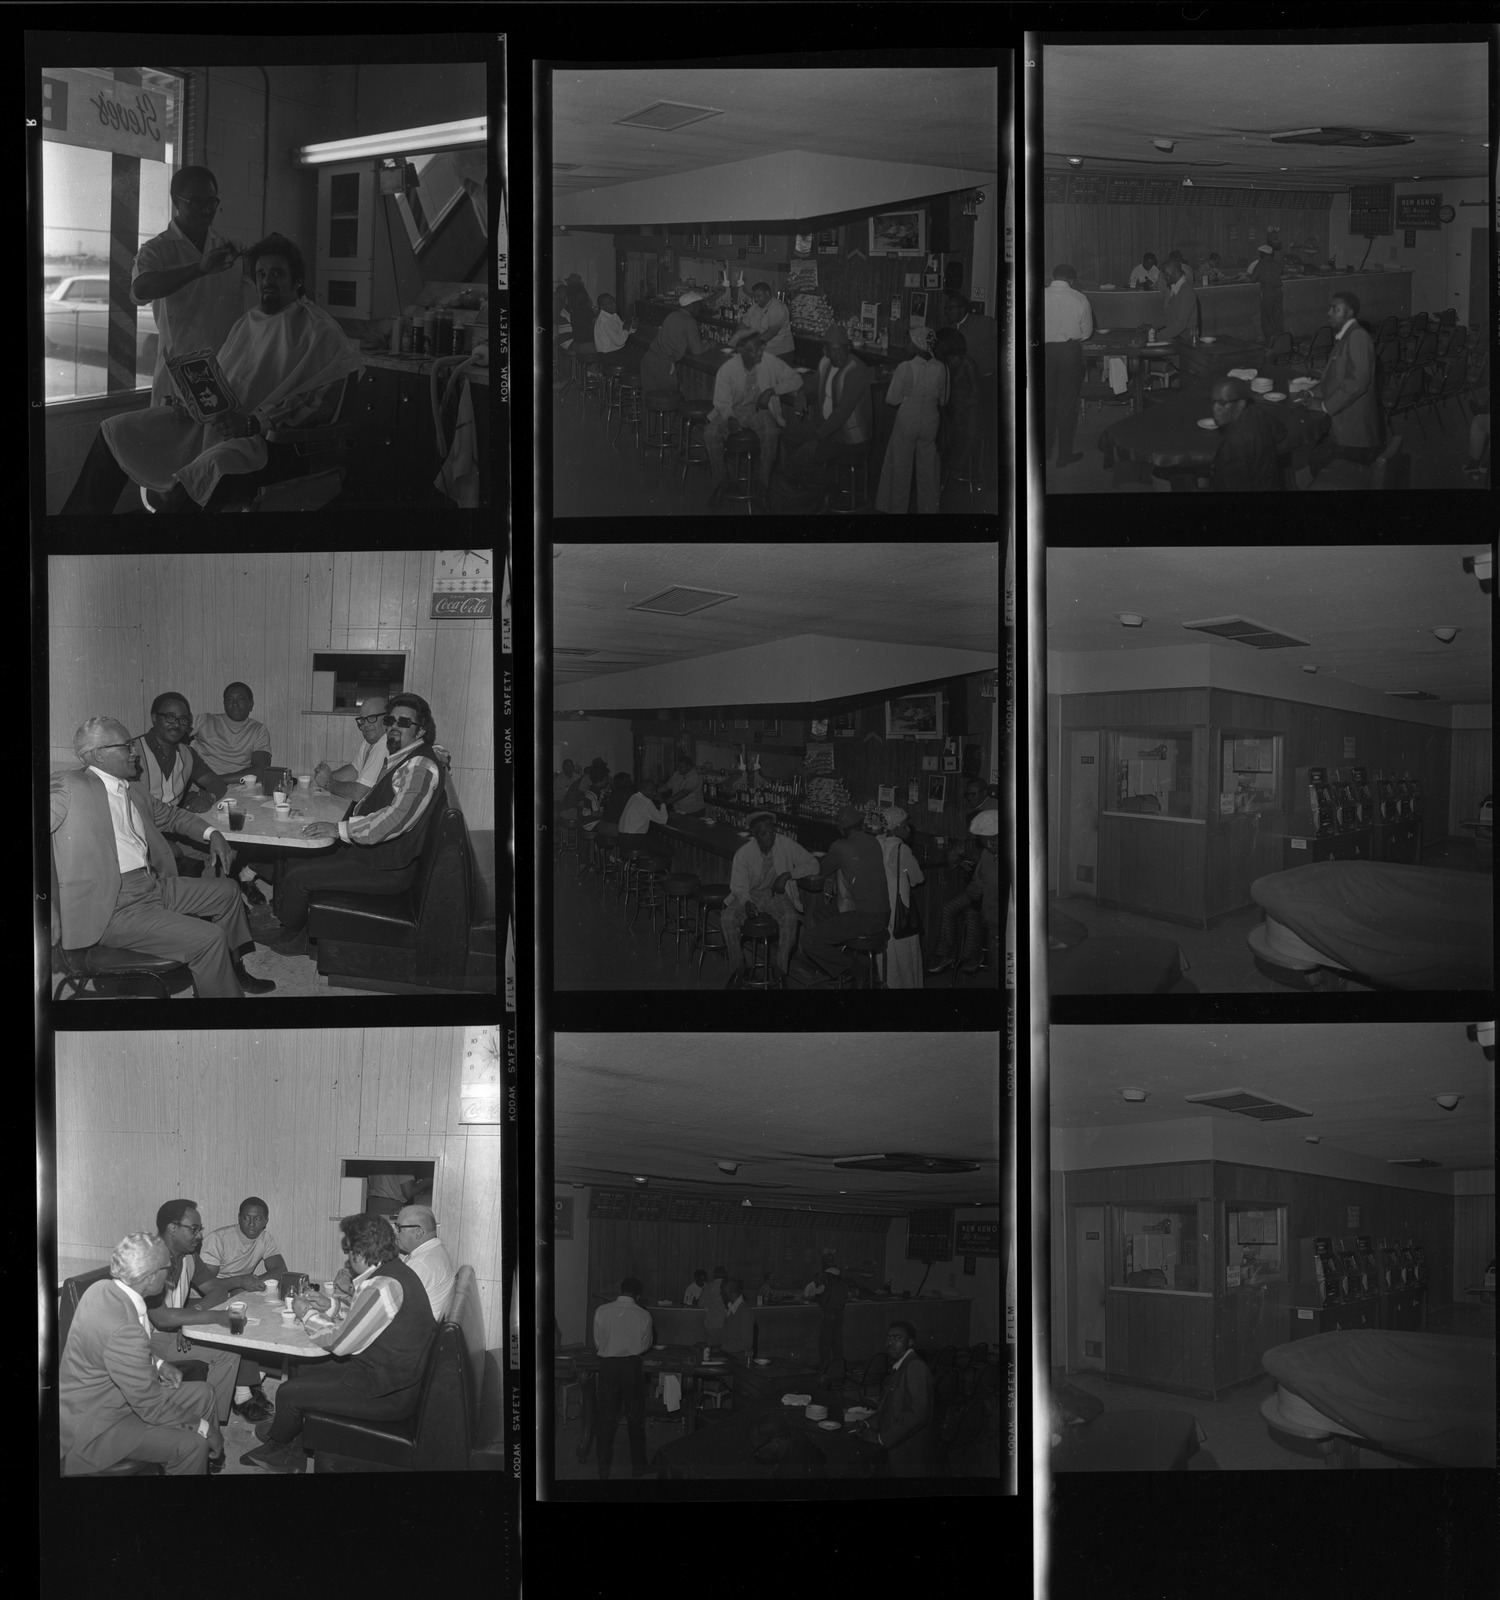 Set of negatives by Clinton Wright including El Rio Club, Wolfman Jack, salesman at Ford, and Home Extension Program, 1970, page 3